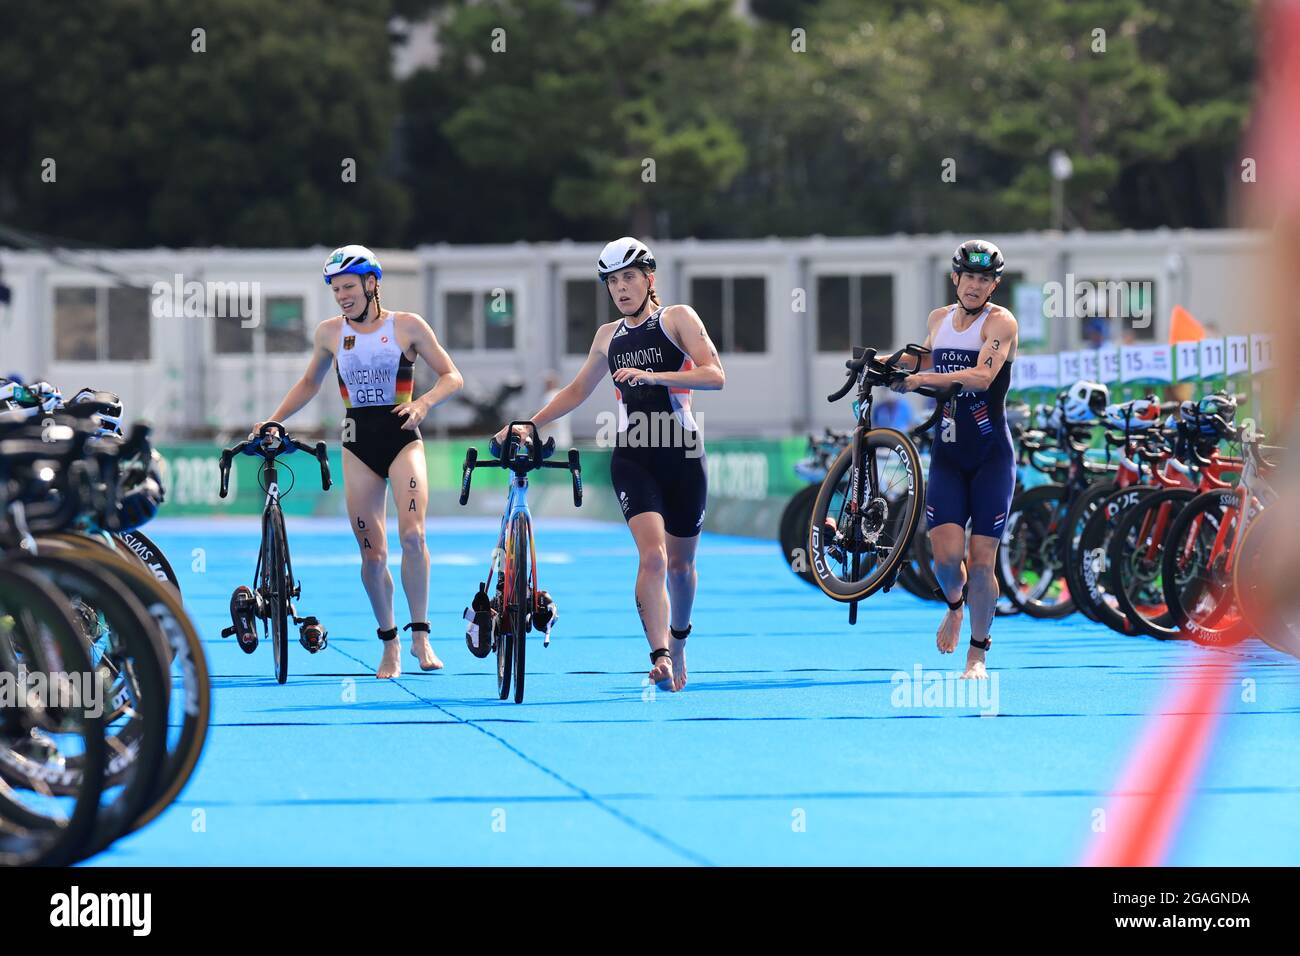 Tokyo, Japan. 31st July, 2021. Jessica LEARMONTH (GBR) in the Bicycle transition area Triathlon : Mixed Relay during the Tokyo 2020 Olympic Games at the Odaiba Marine Park in Tokyo, Japan . Credit: Daisuke Asauchi/AFLO SPORT/Alamy Live News Stock Photo